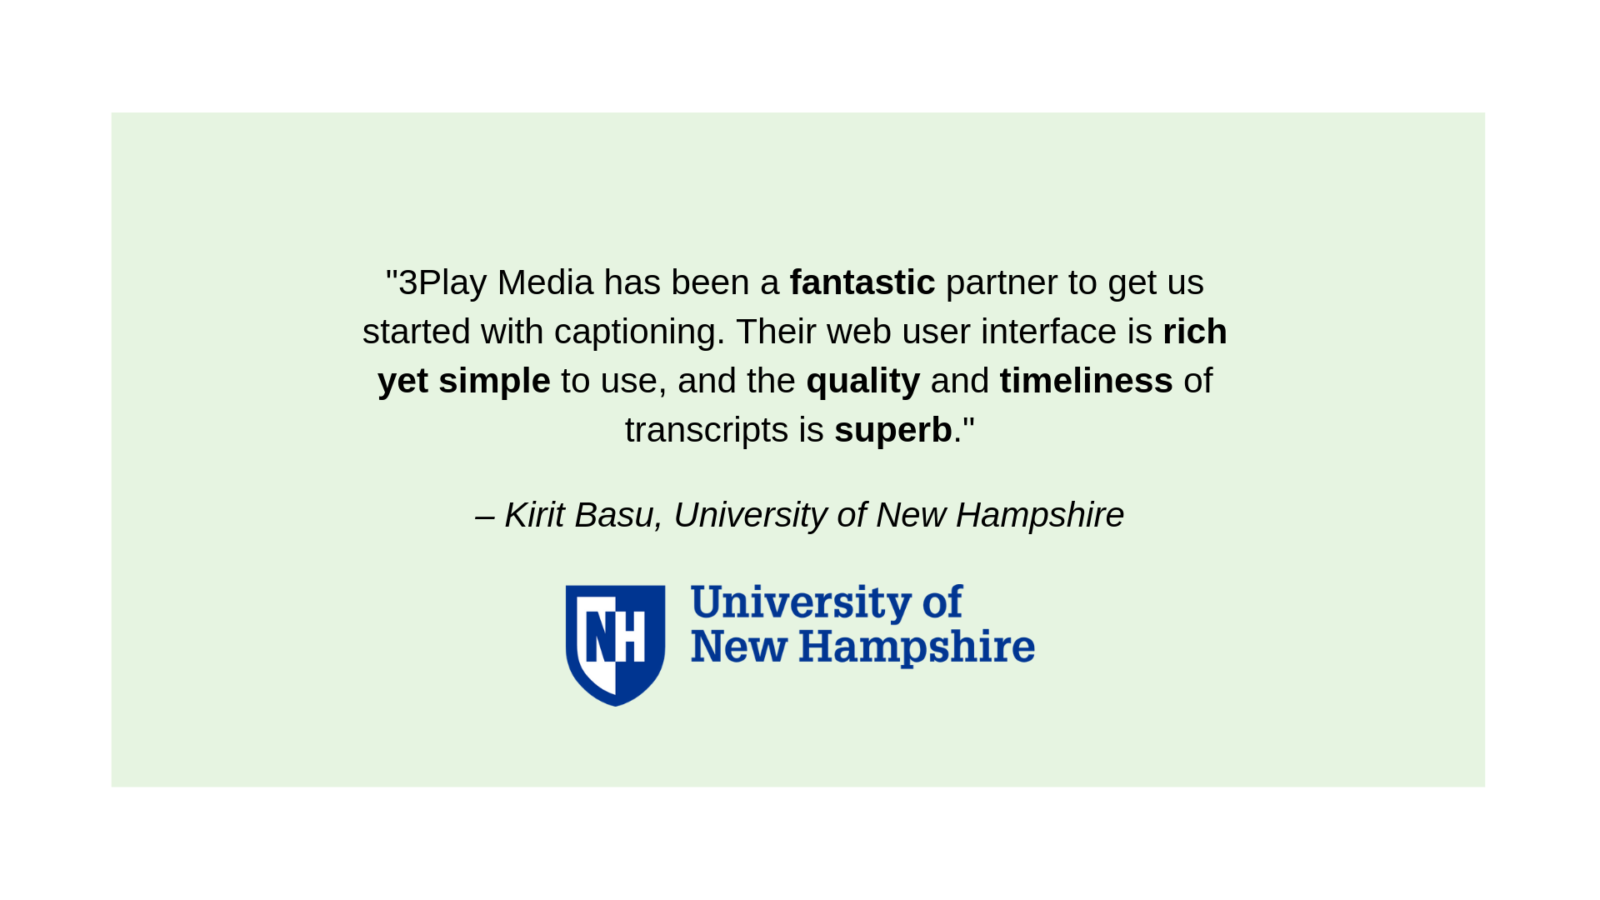 according to a 3play customer, "3Play Media has been a fantastic partner to get us started with captioning. Their web user interface is rich yet simple to use, and the quality and timeliness of transcripts is superb.